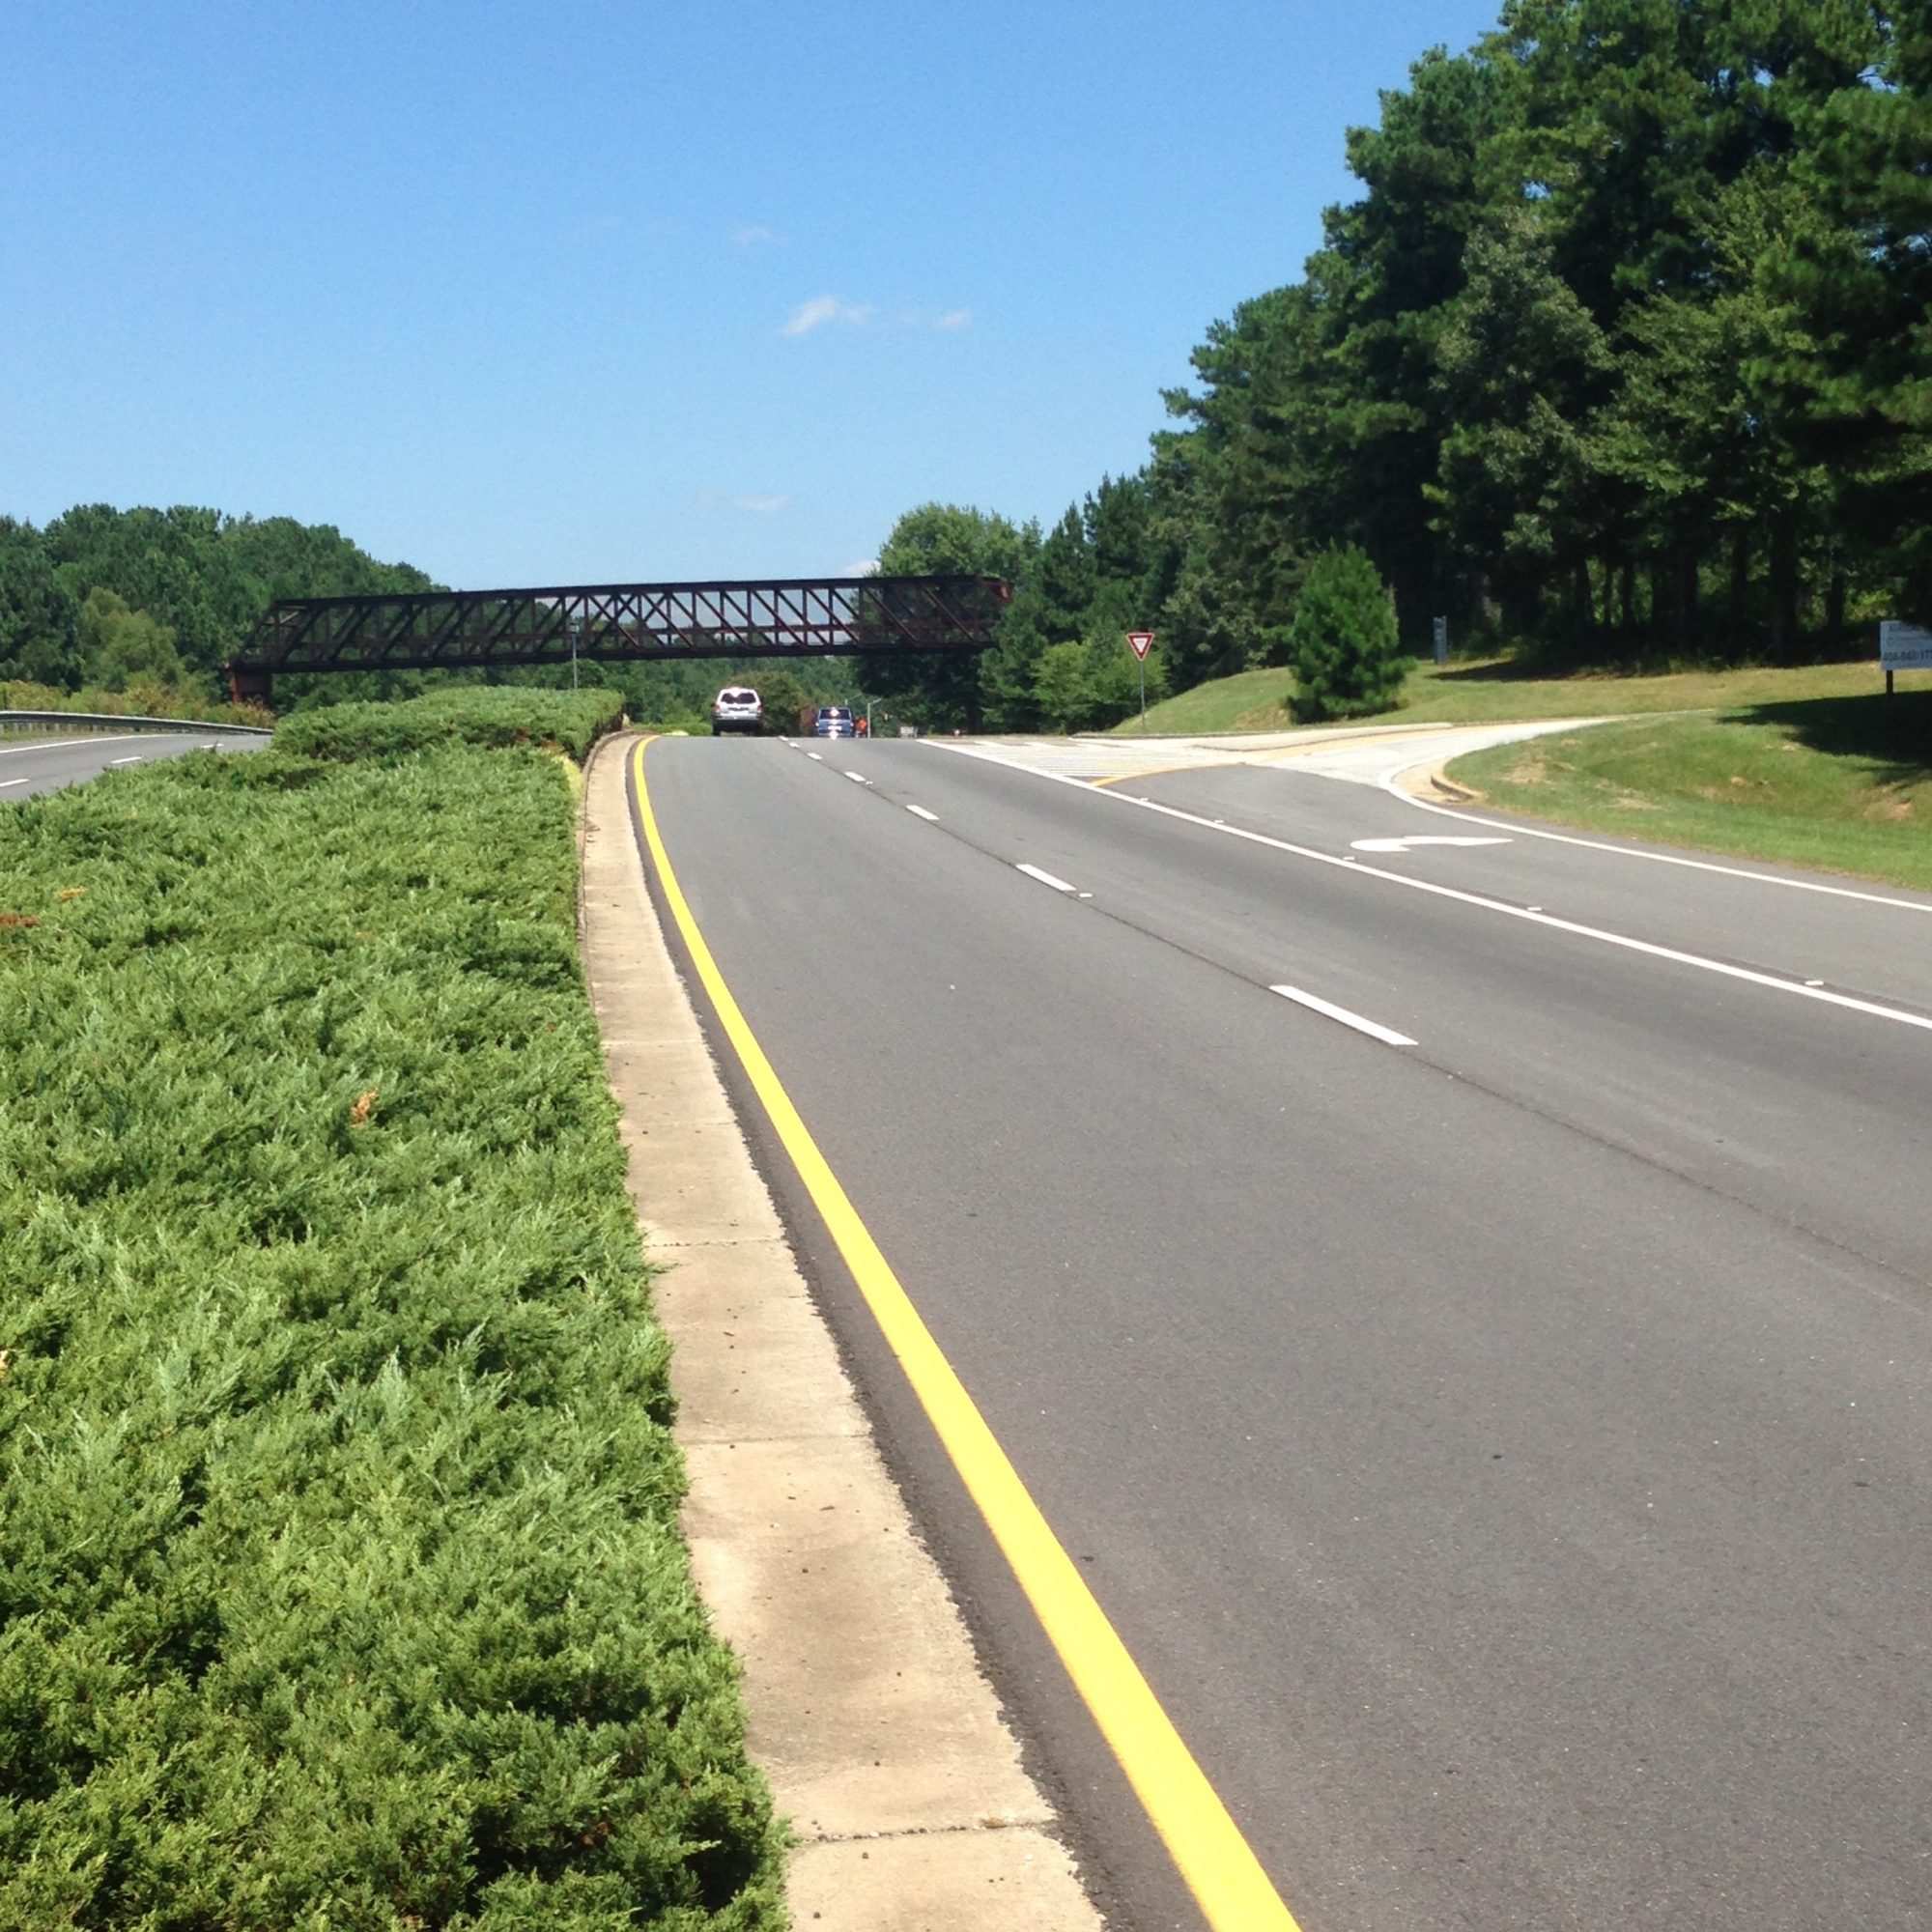 The C.W. Matthews team placed the first OGI (open graded interlayer) for the Georgia Department of Transportation on State Route 74 for its QIC award-winning project. Photo courtesy C.W. Matthews.